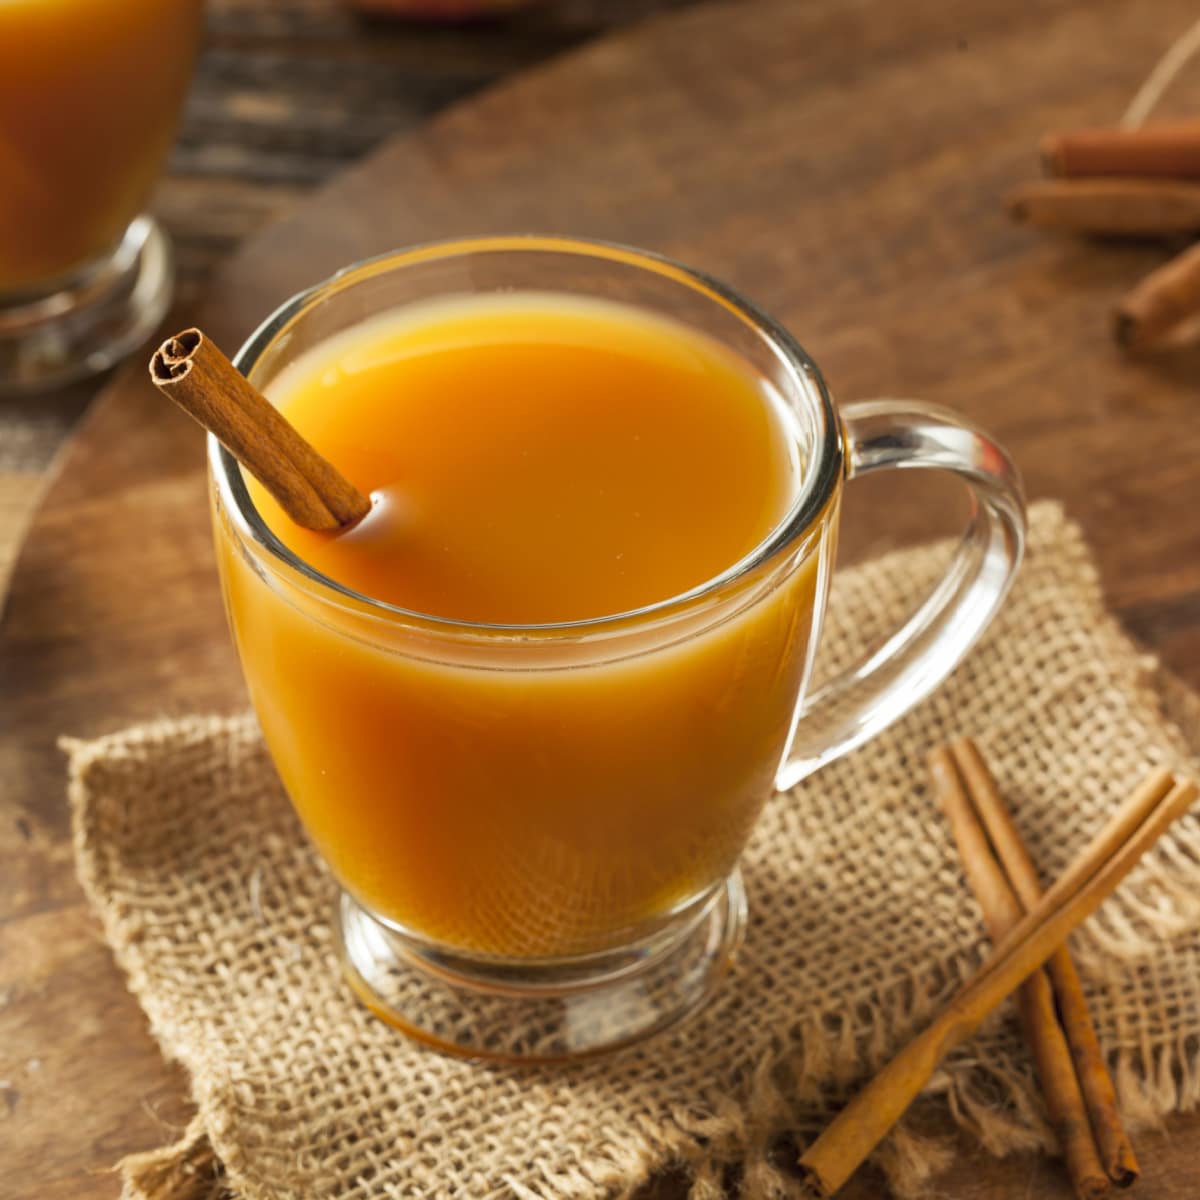 Warm Apple Cider on a Glass With Cinnamon